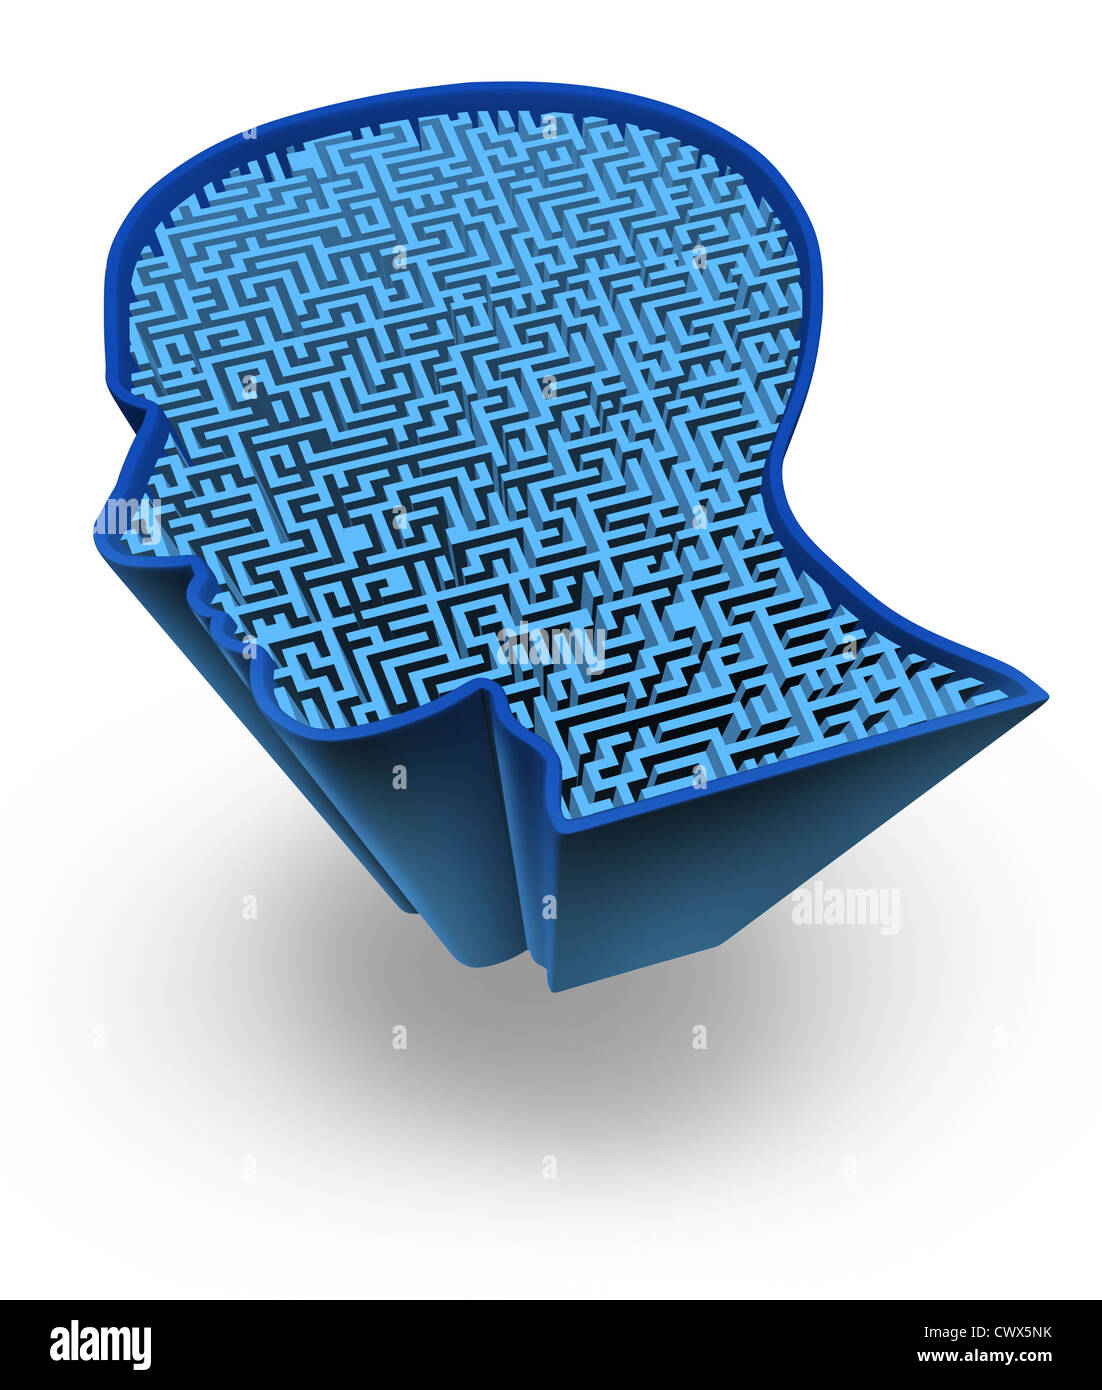 Human brain and intelligence puzzle with a blue glowing maze and labyrinth in the shape of a human head as a symbol of the complexity of brain thinking as a challenging problem to solve by medical doctors. Stock Photo